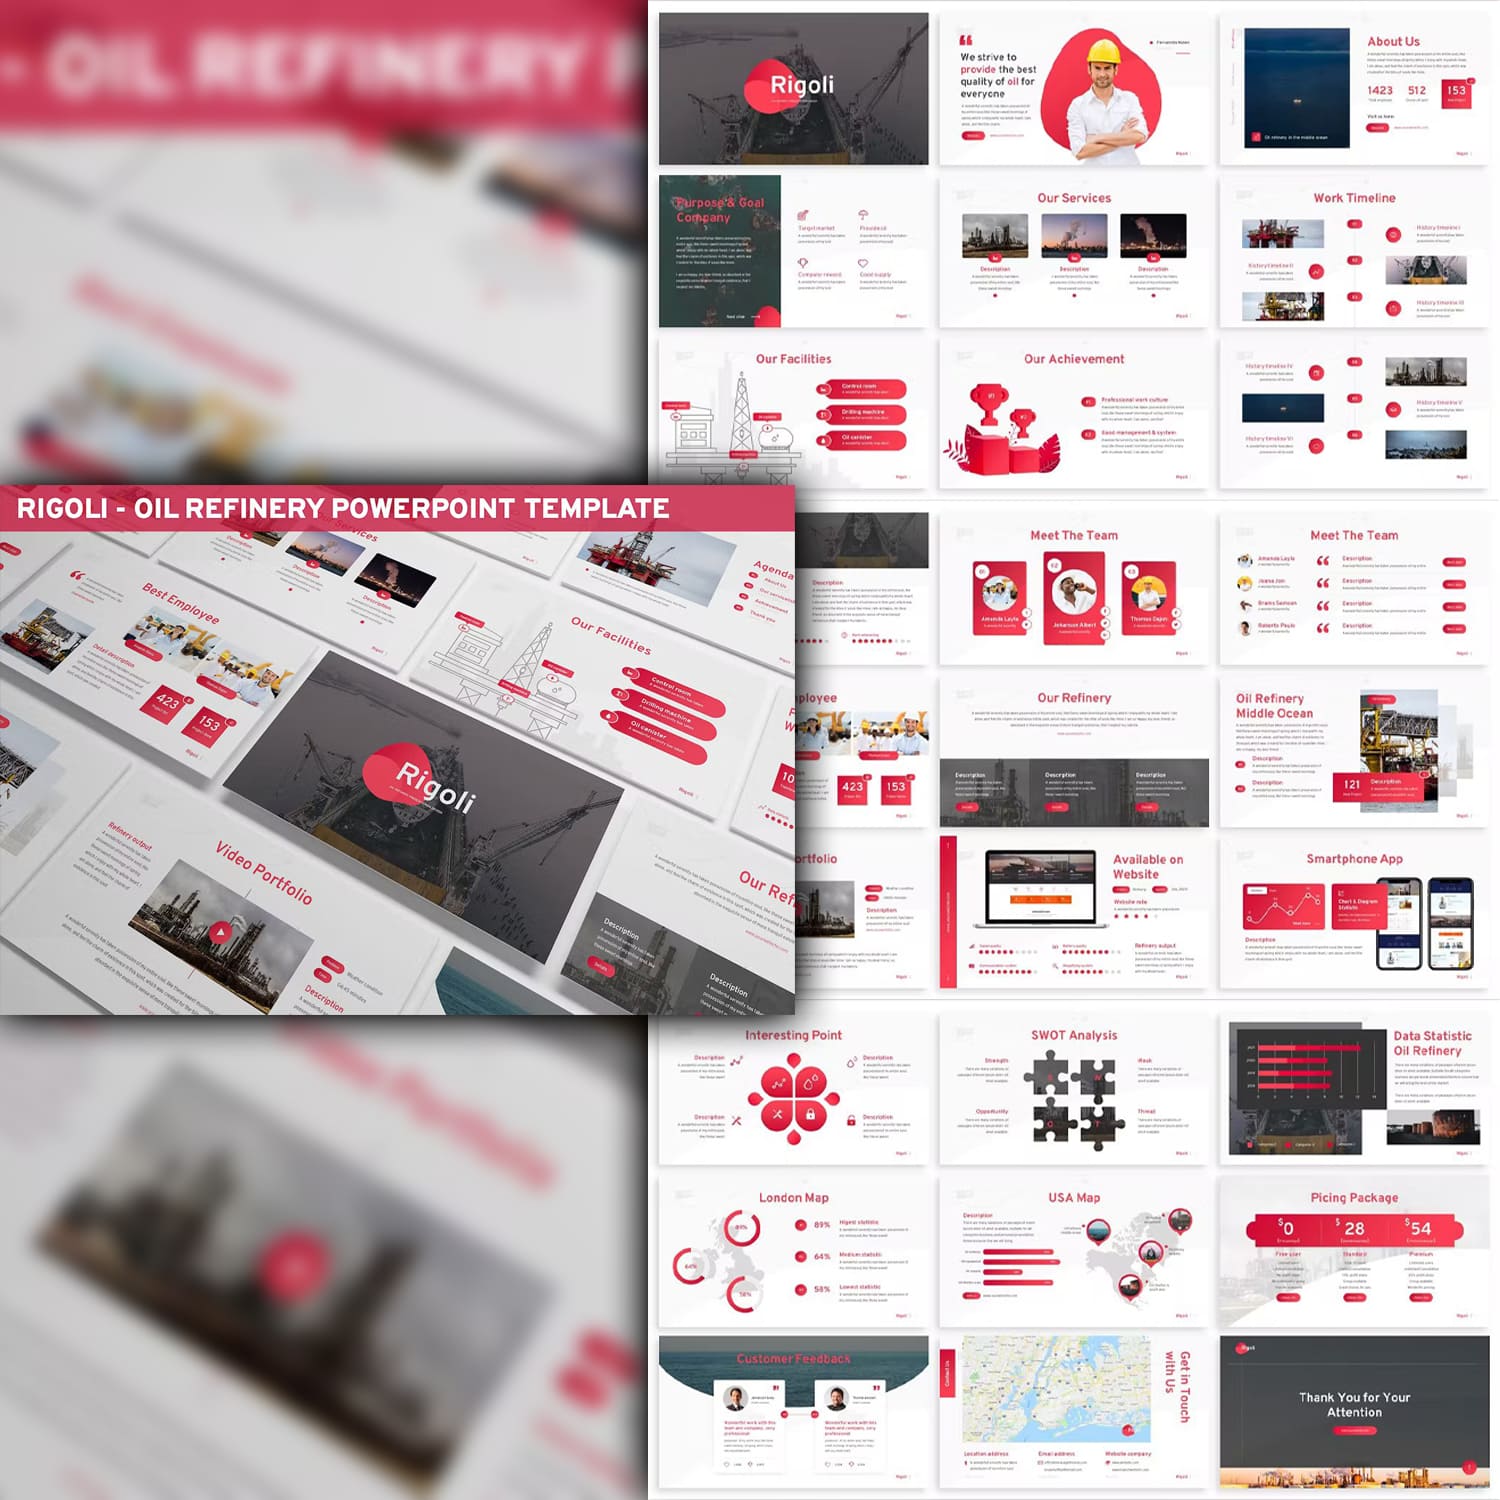 Rigoli oil refinery powerpoint template from SlideFactory.